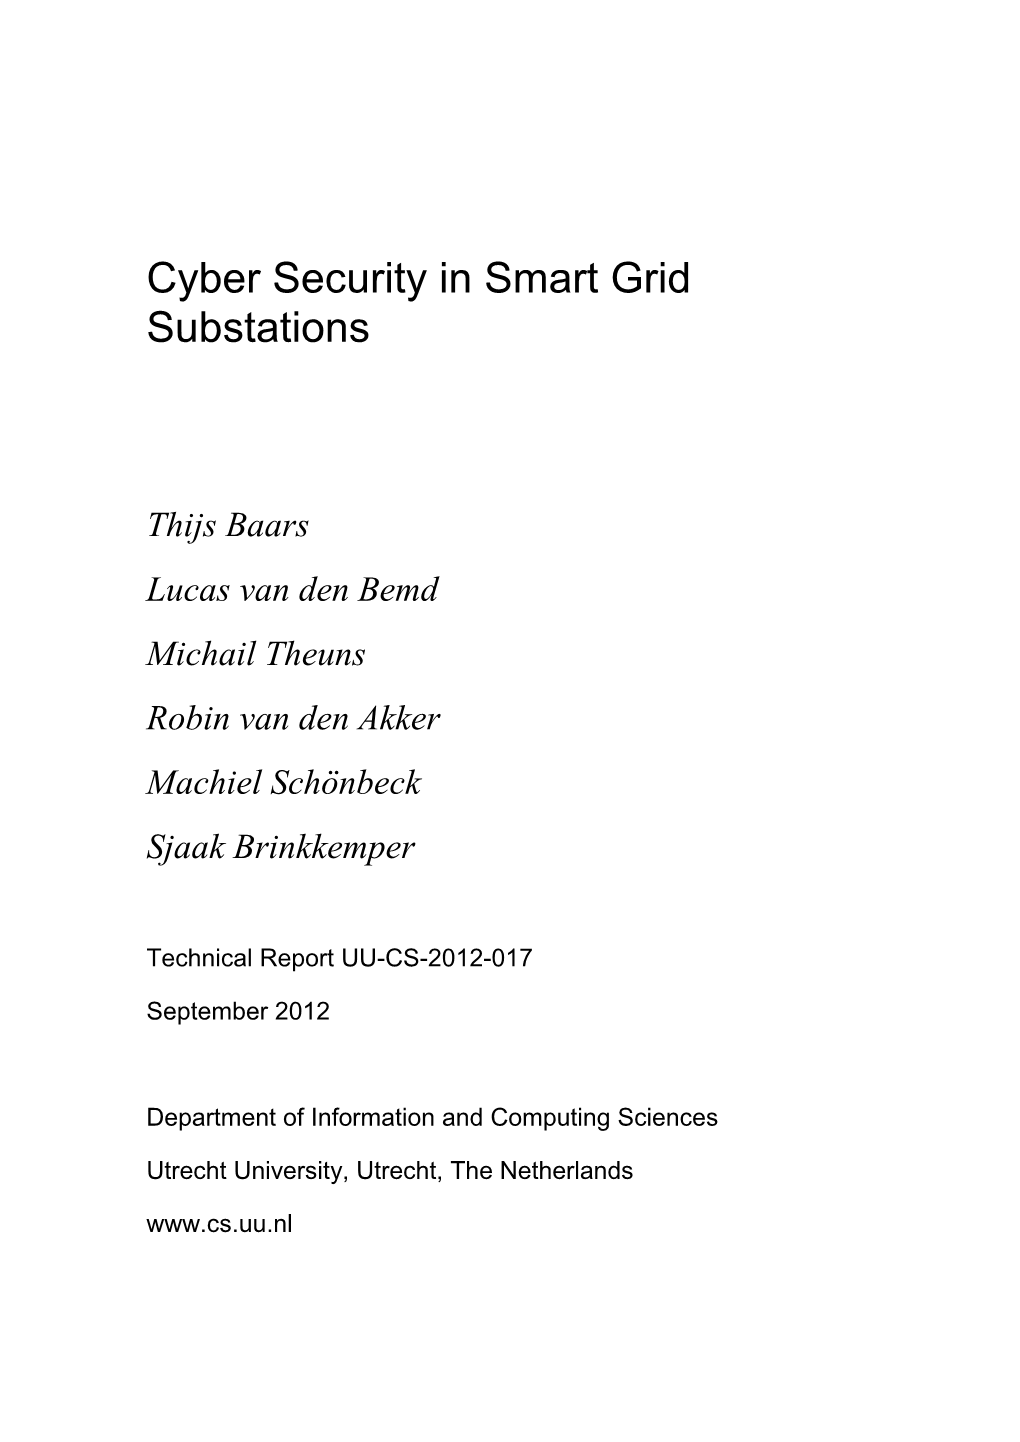 Cyber Security in Smart Grid Substations